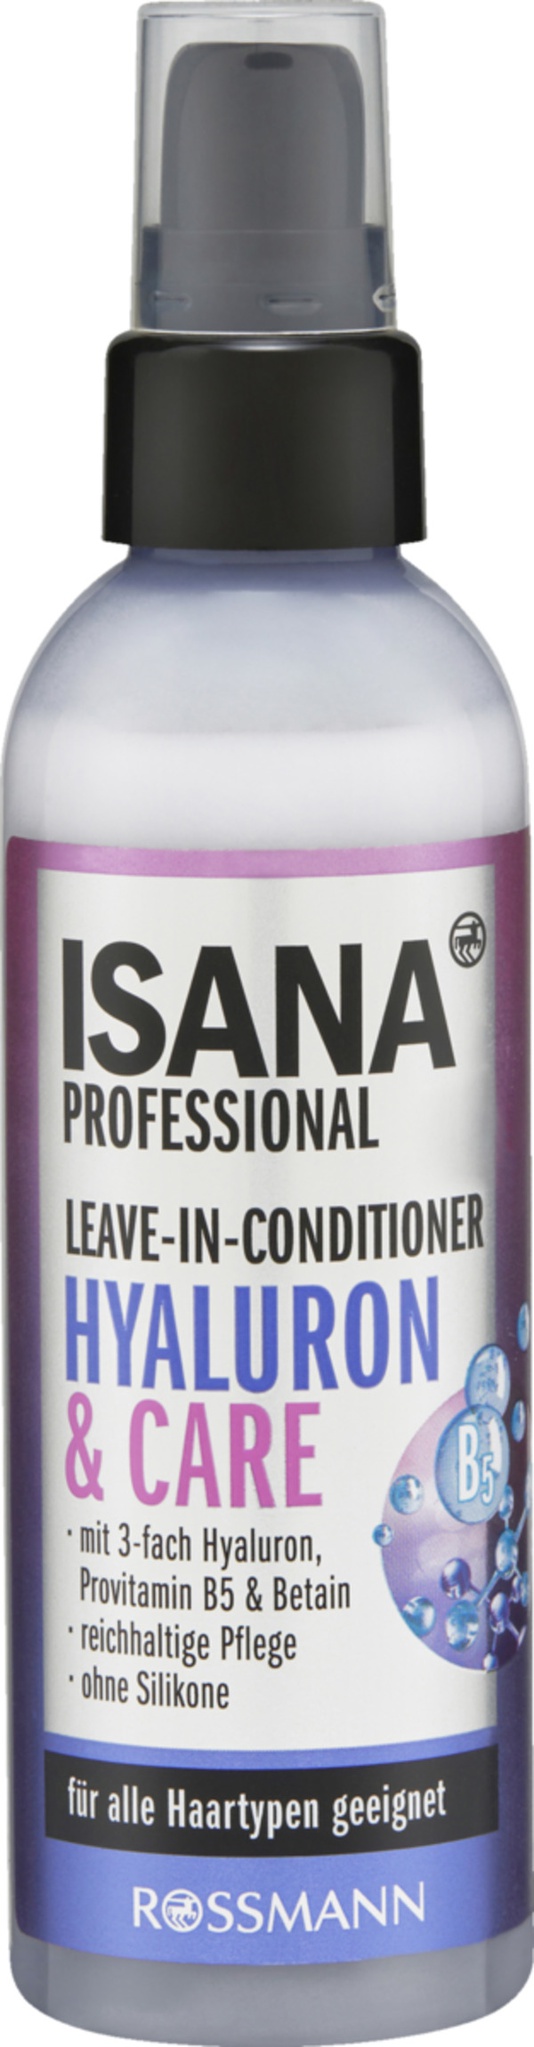 Isana Professional Hyaluron & Care Leave-In-Conditioner